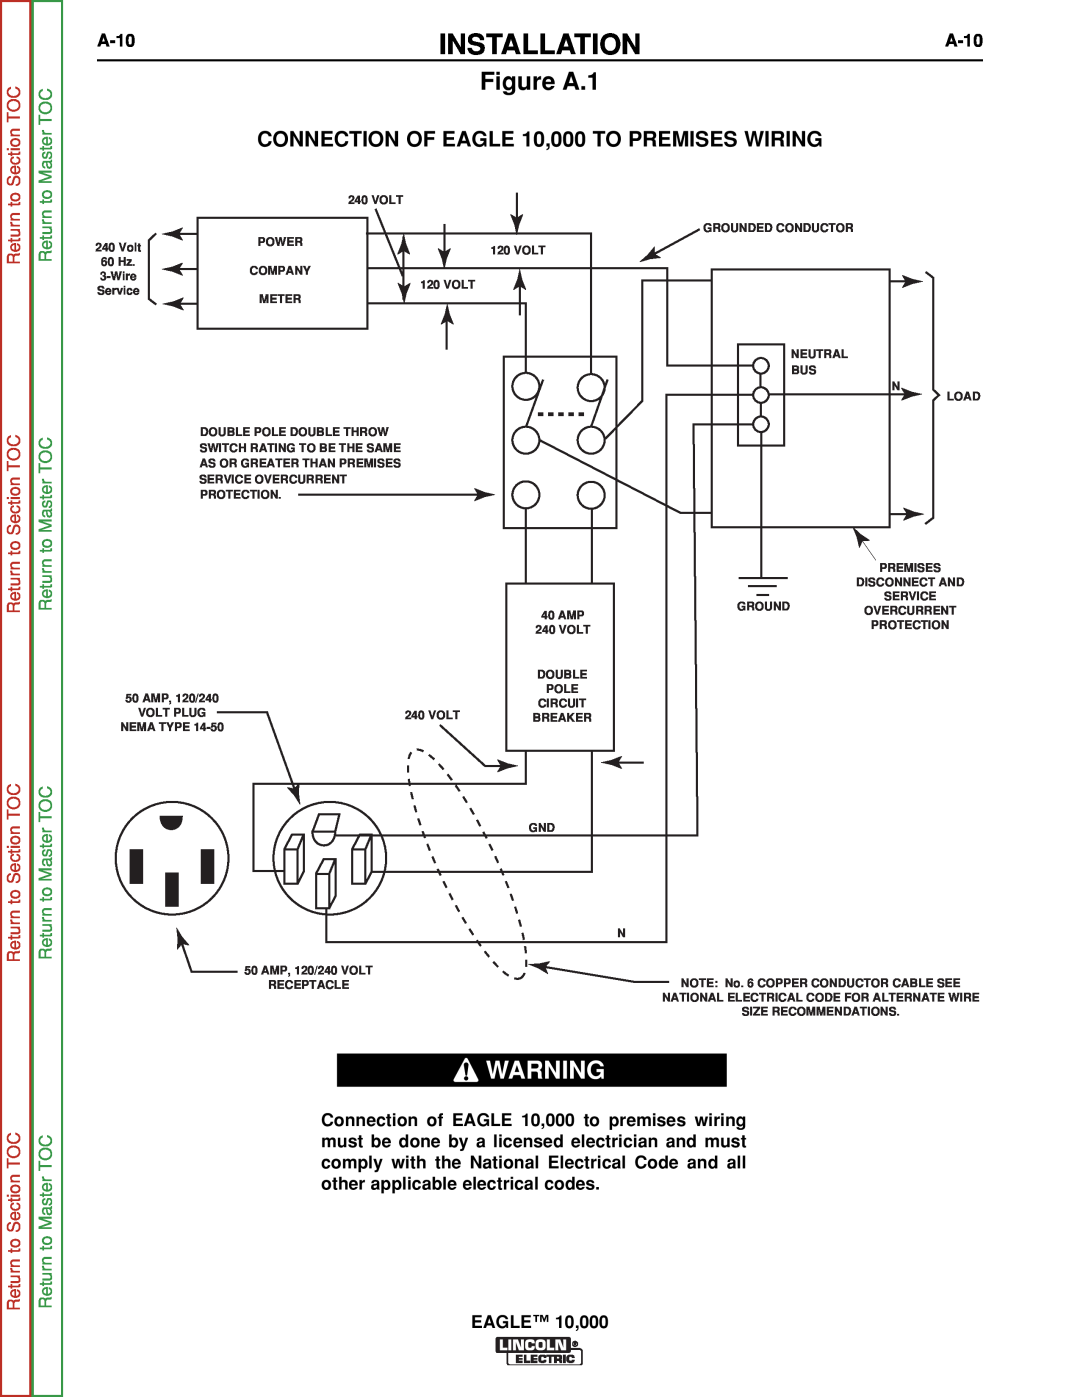 Lincoln Electric SVM192-A Figure A.1, CONNECTION OF EAGLE 10,000 TO PREMISES WIRING, Section TOC, Master TOC, A-10 